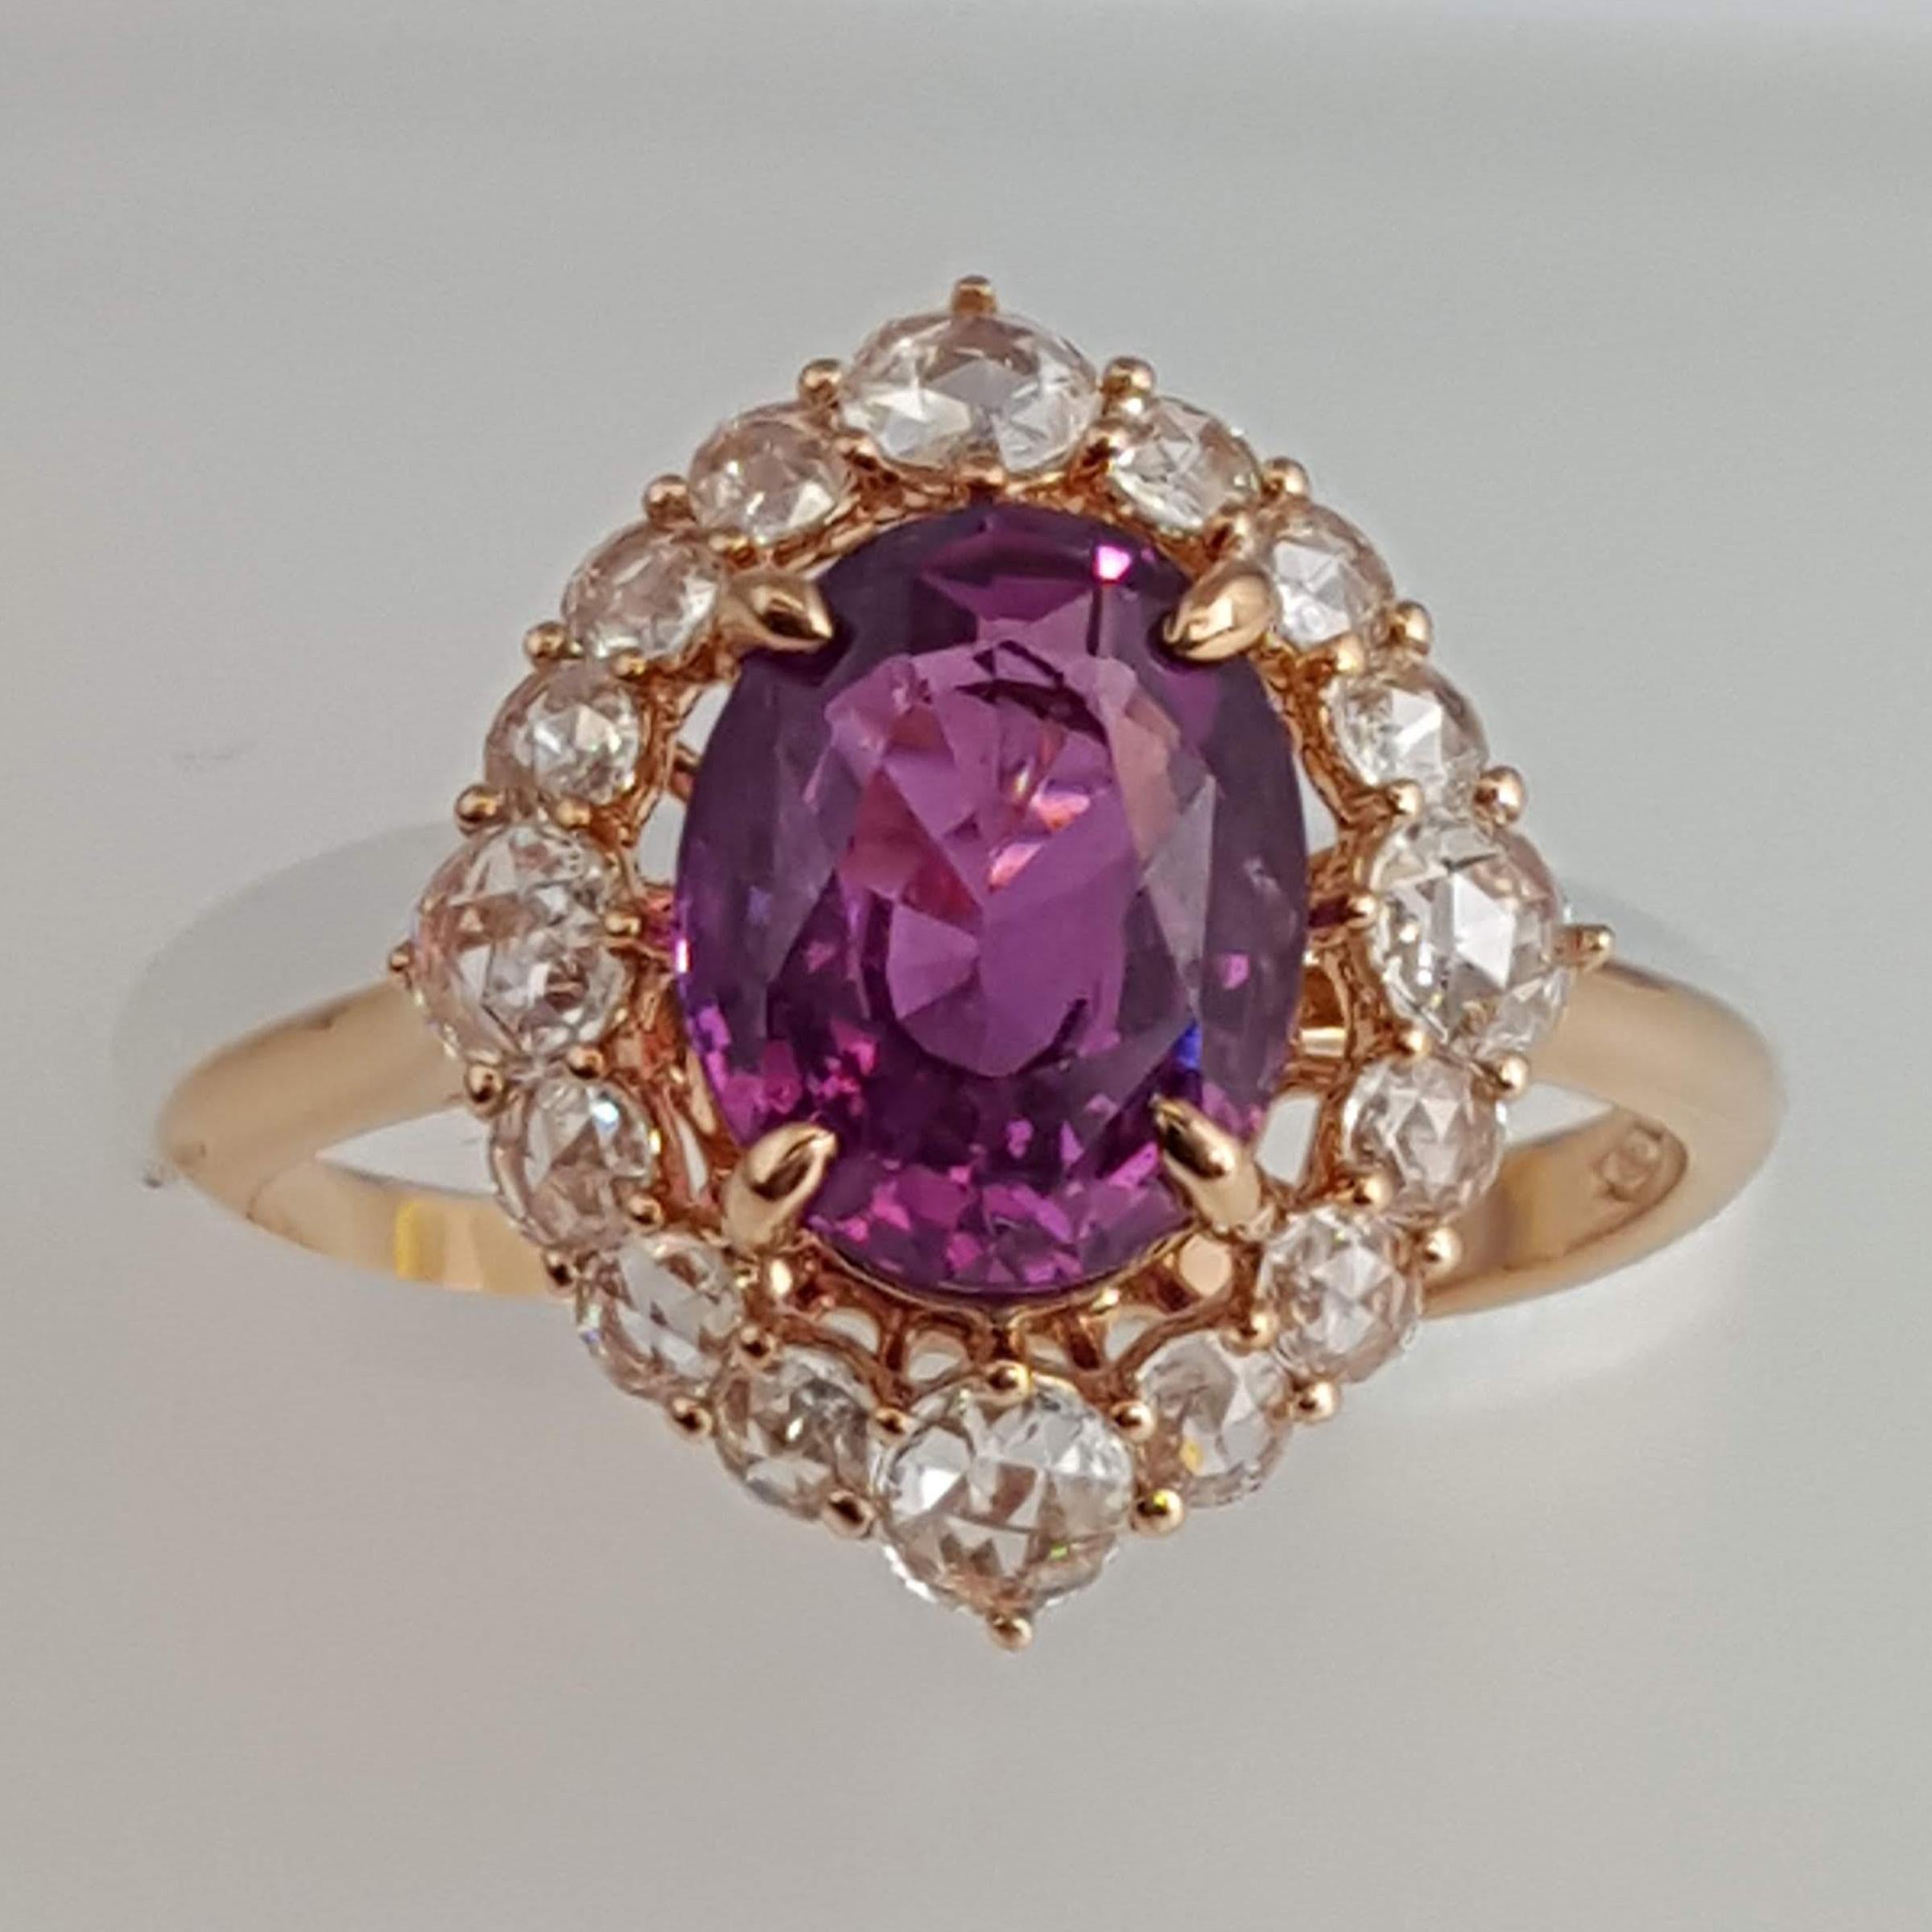 GIA Certified 2.48 Carat Oval Cut Purple-Pink Sapphire Ring in 18k Rose Gold 3